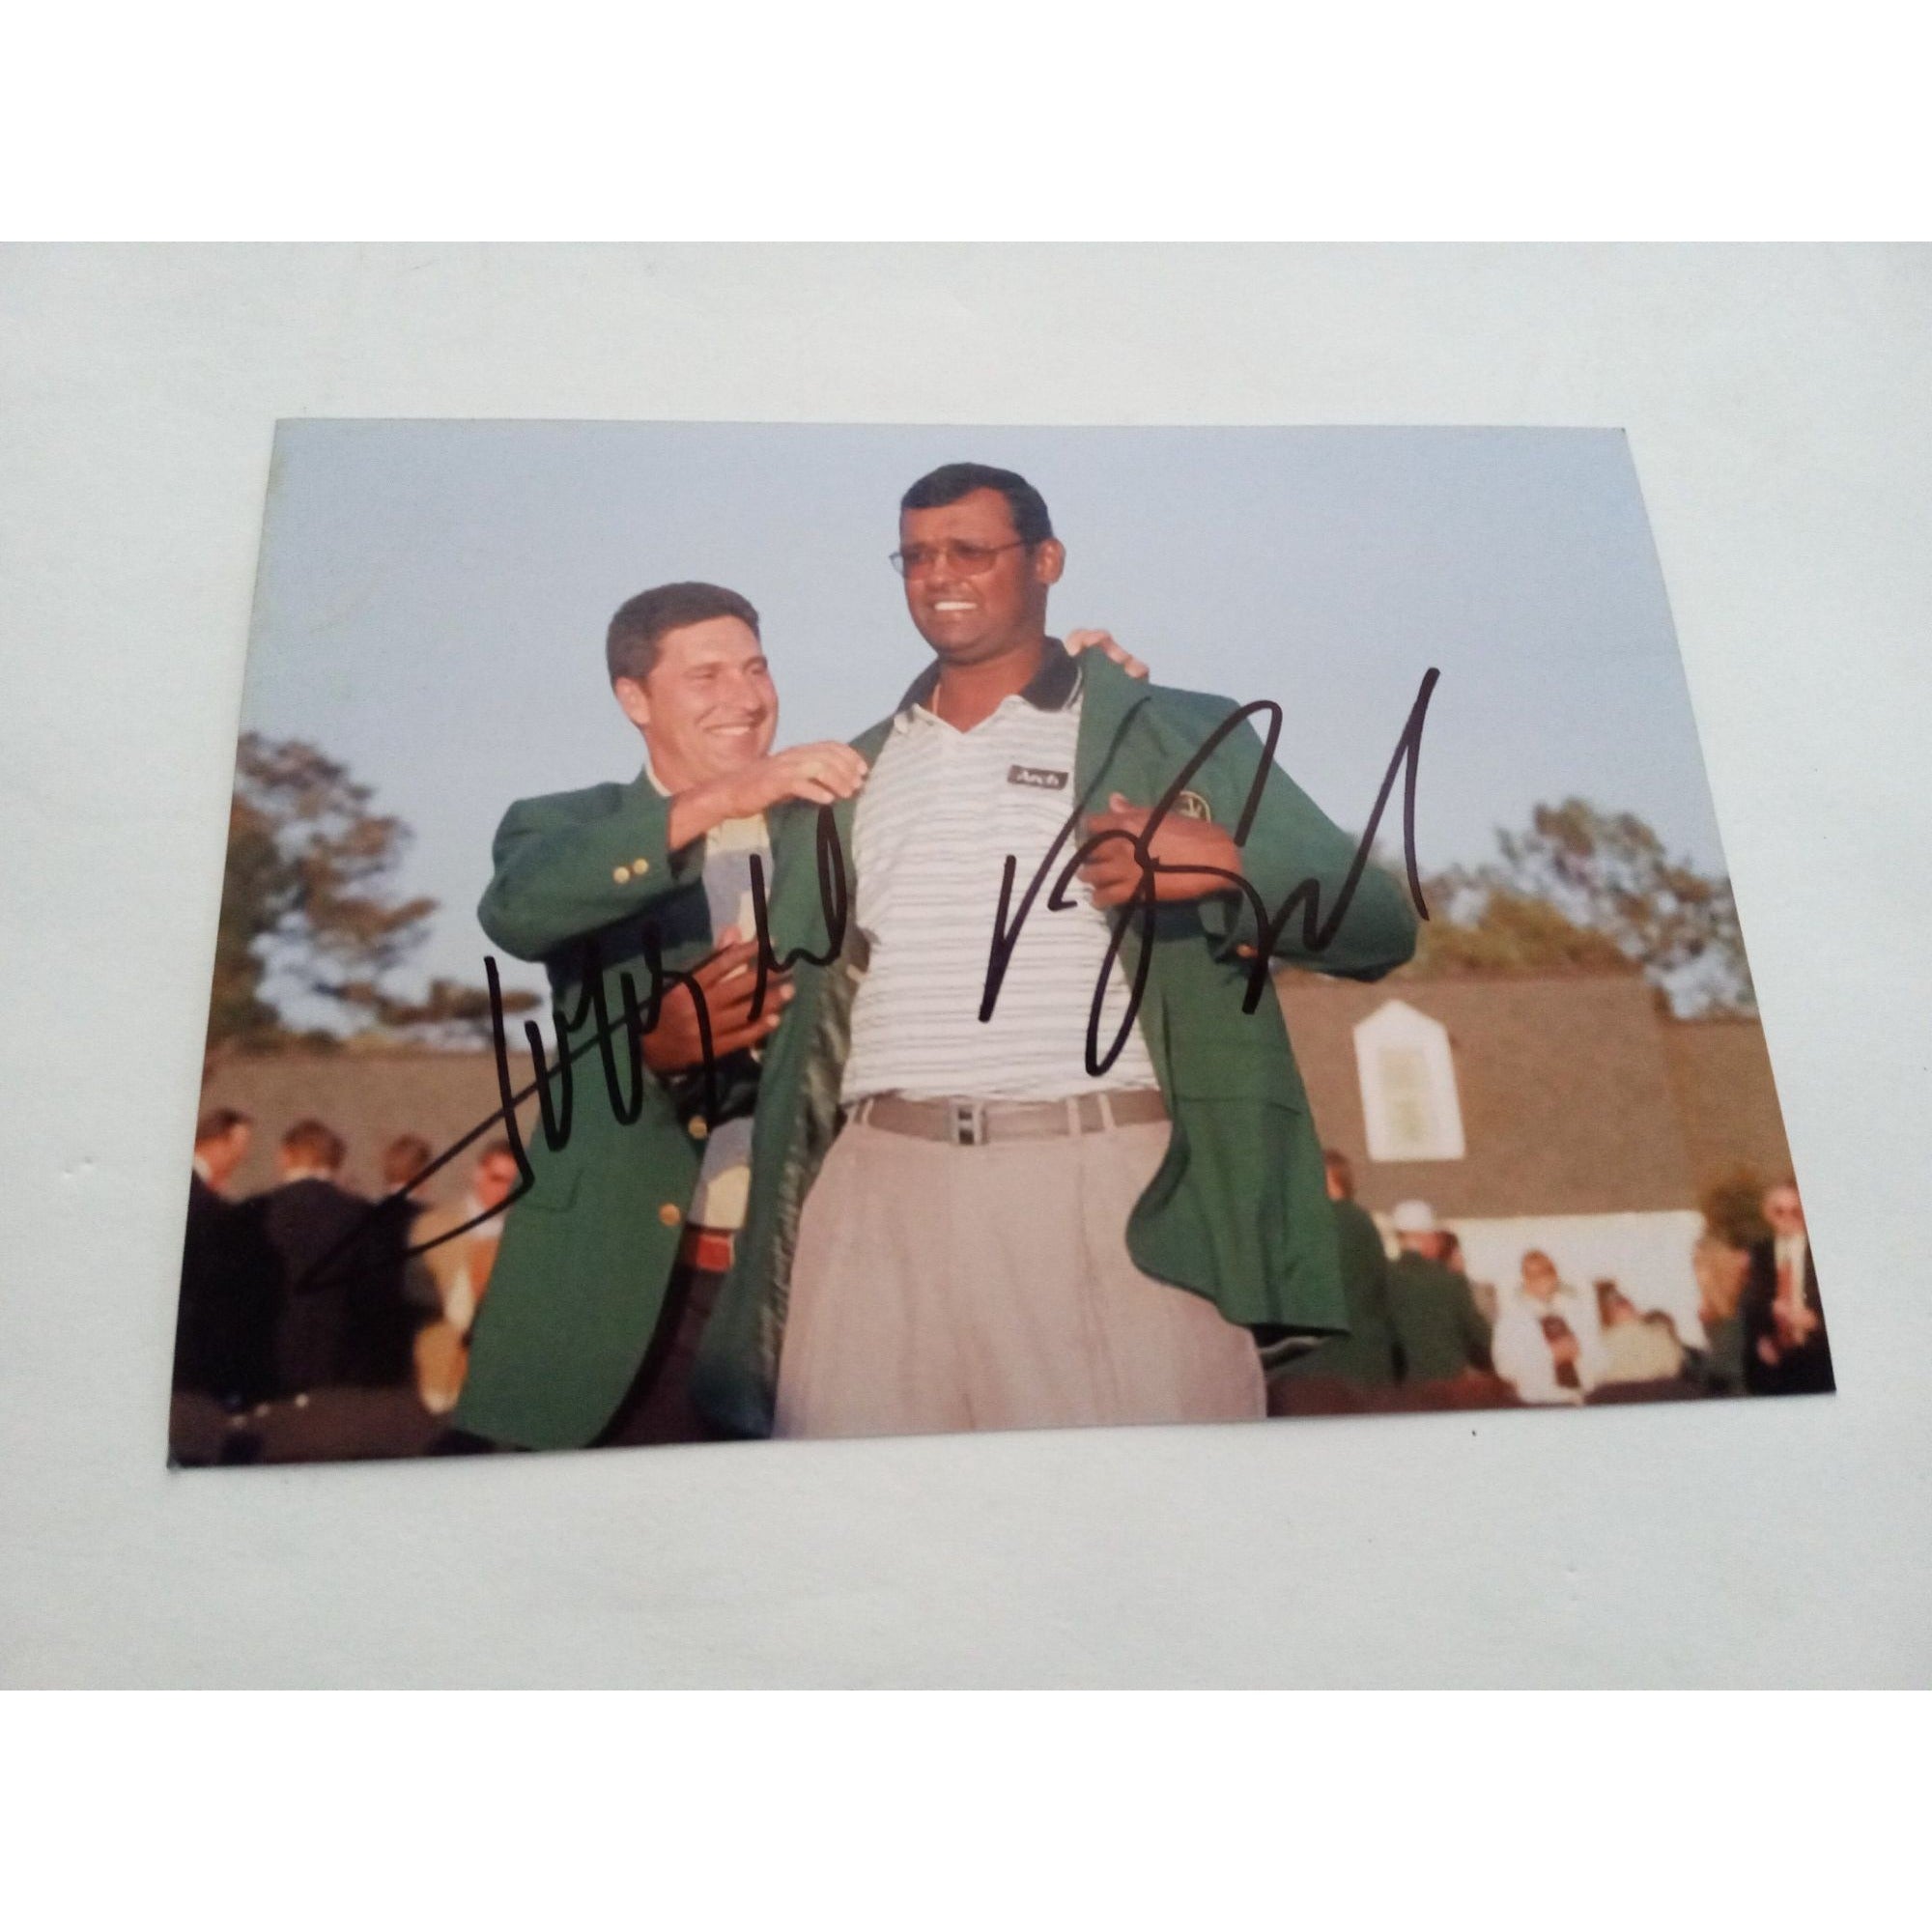 Masters golf champions Vijay Singh and Jose Maria Olazabal 5 x 7 photo signed with proof